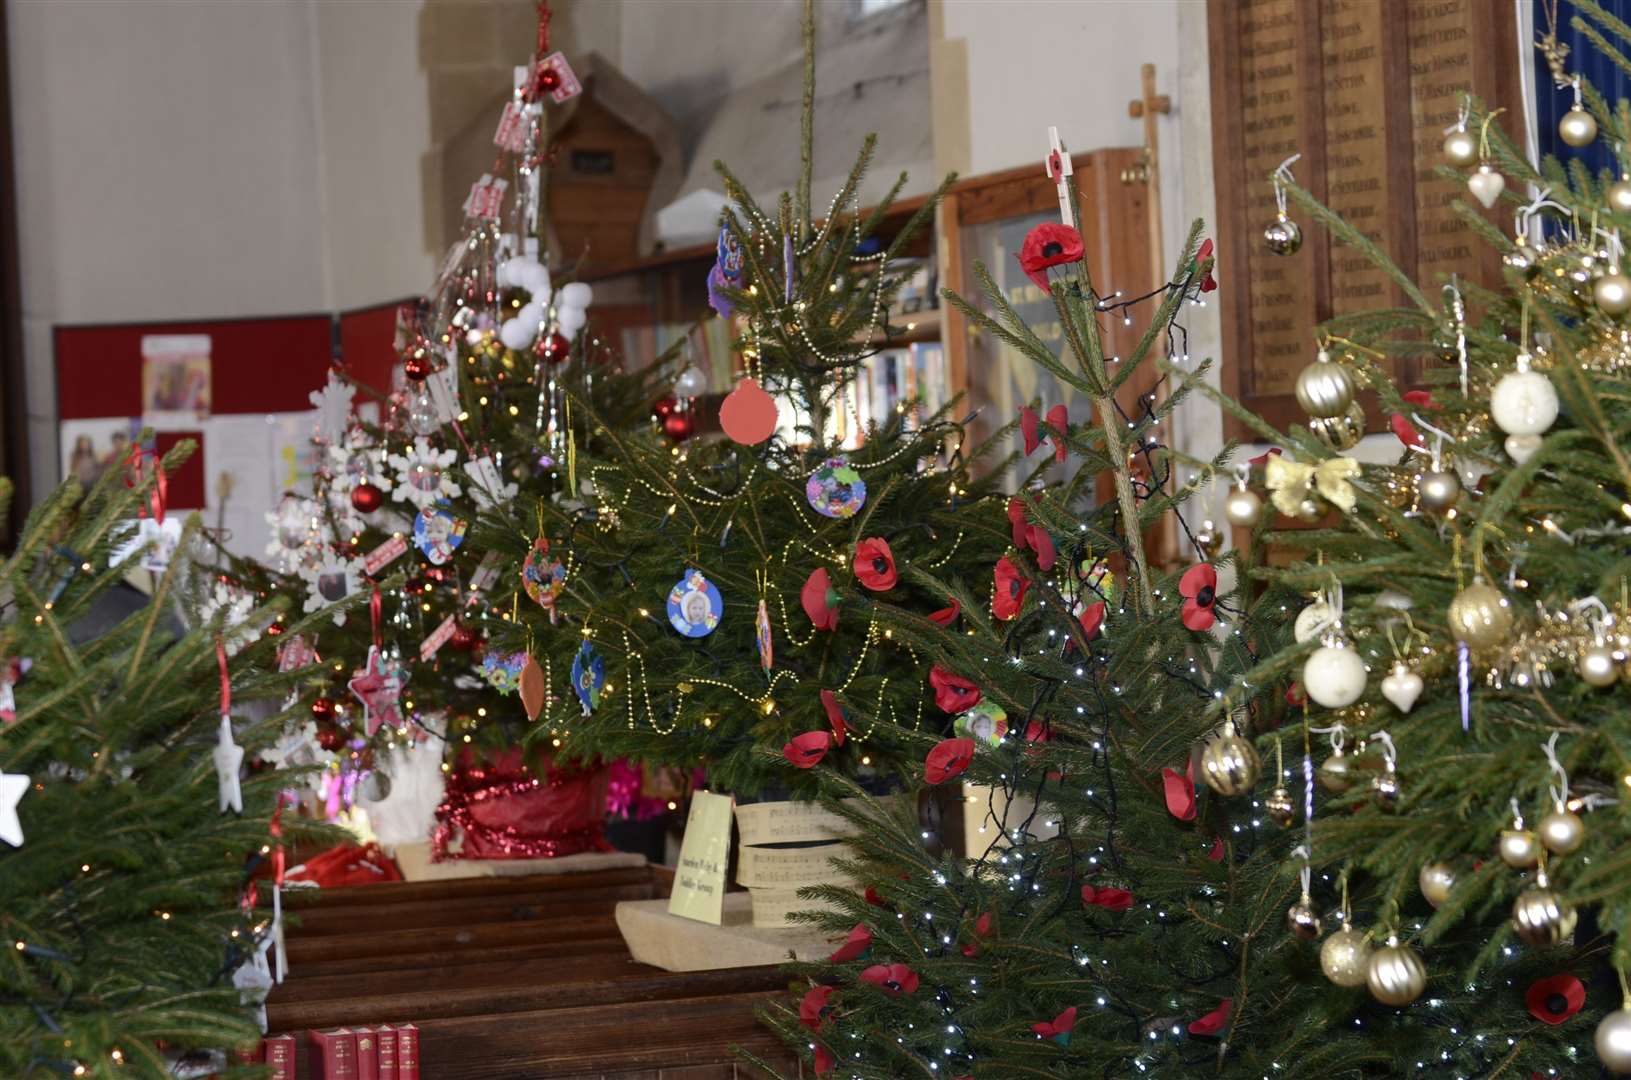 Christmas Tree Festivals put on a very festive display for families